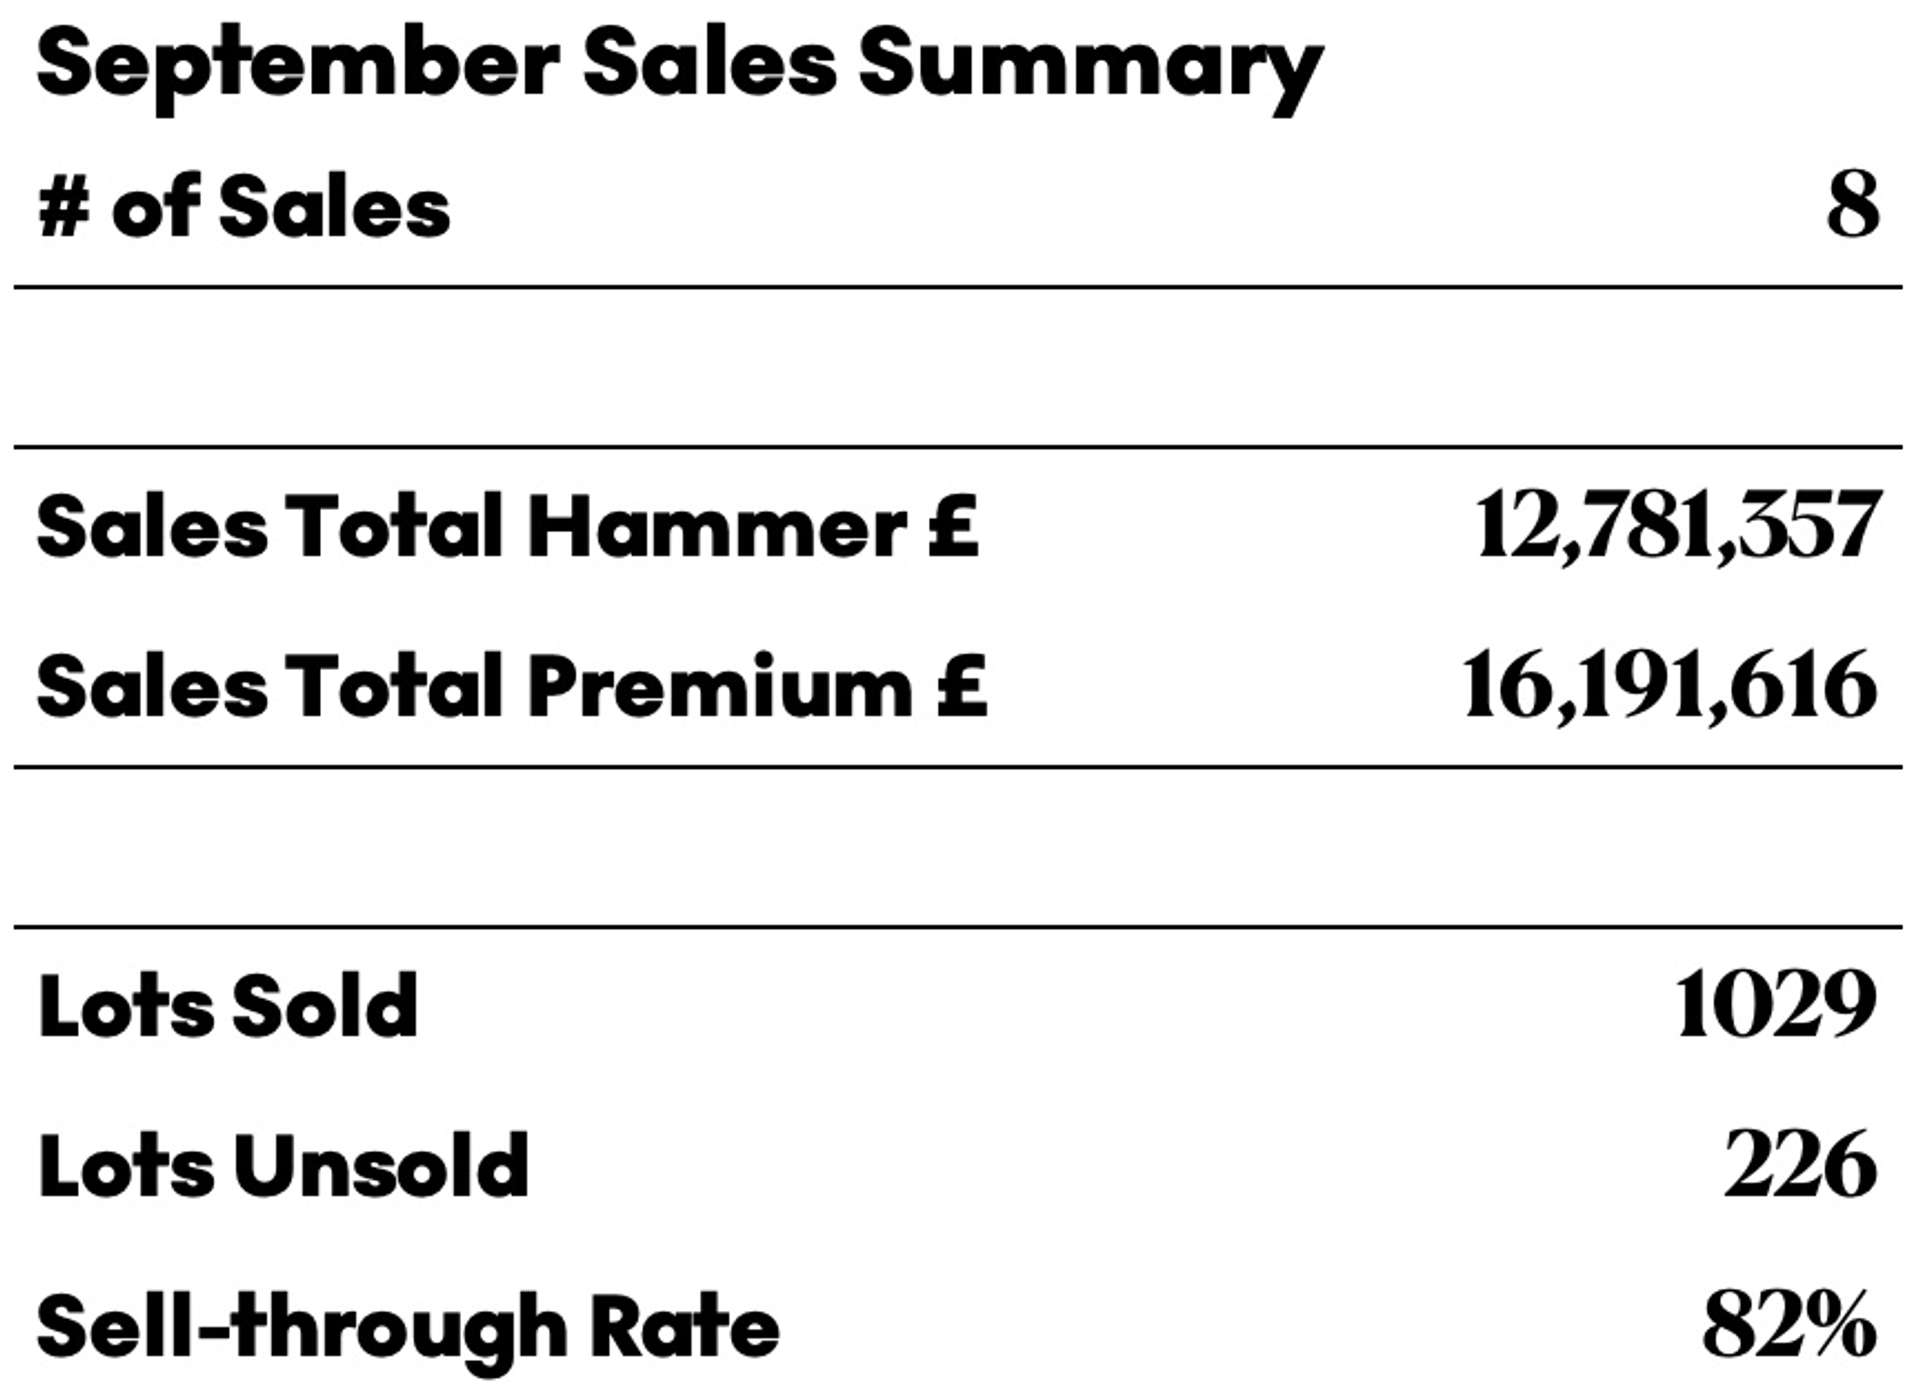 September 2023 auction sales figures displaying hammer total, premium total, lots sold, lots unsold, and the sell-through rate.